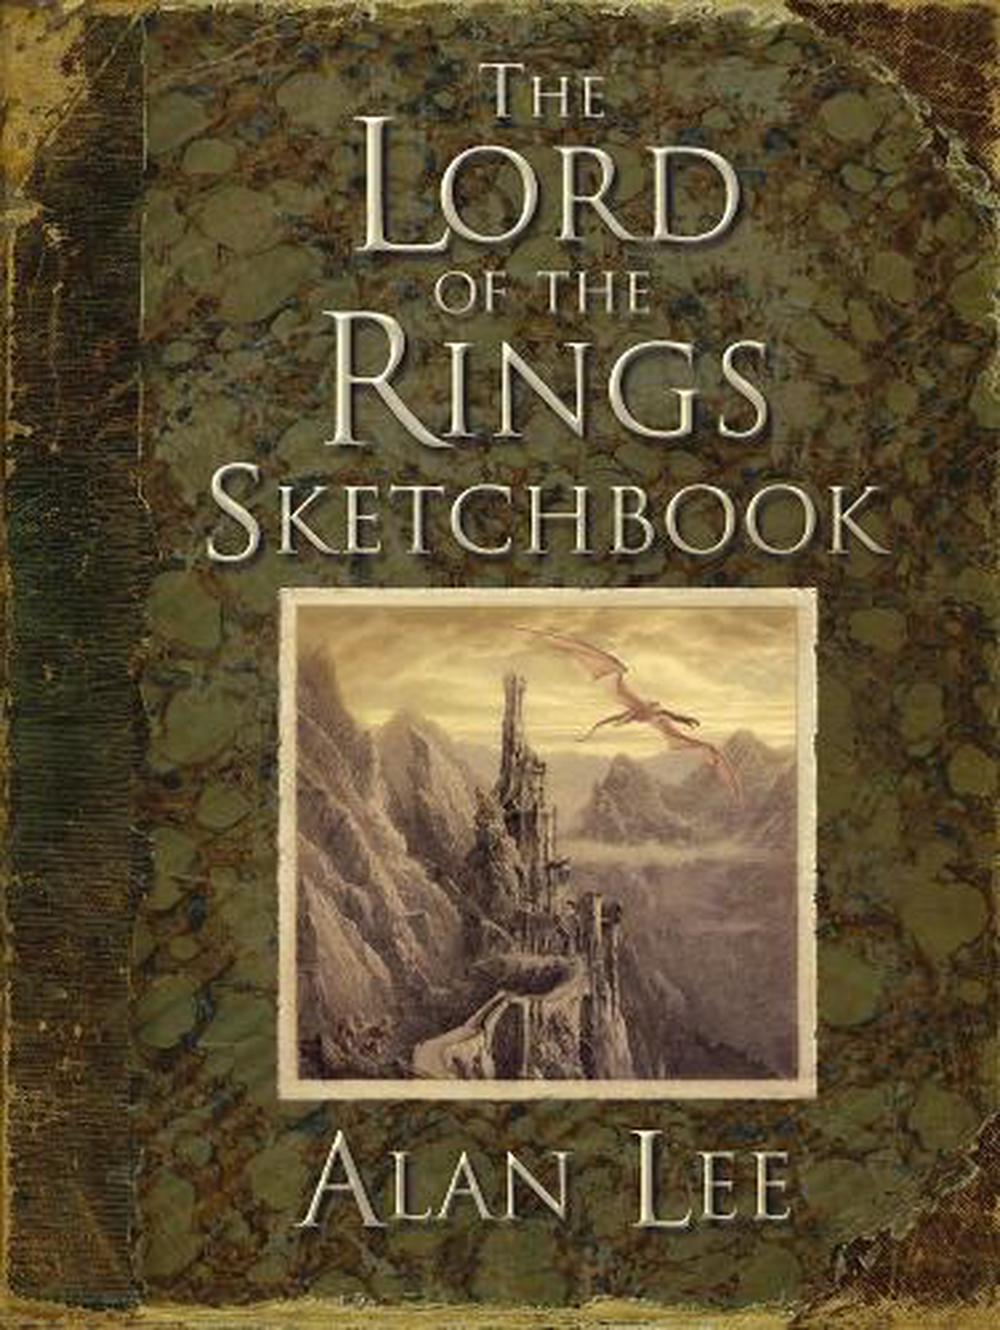 The "Lord of the Rings" Sketchbook by Alan Lee (English) Hardcover Book